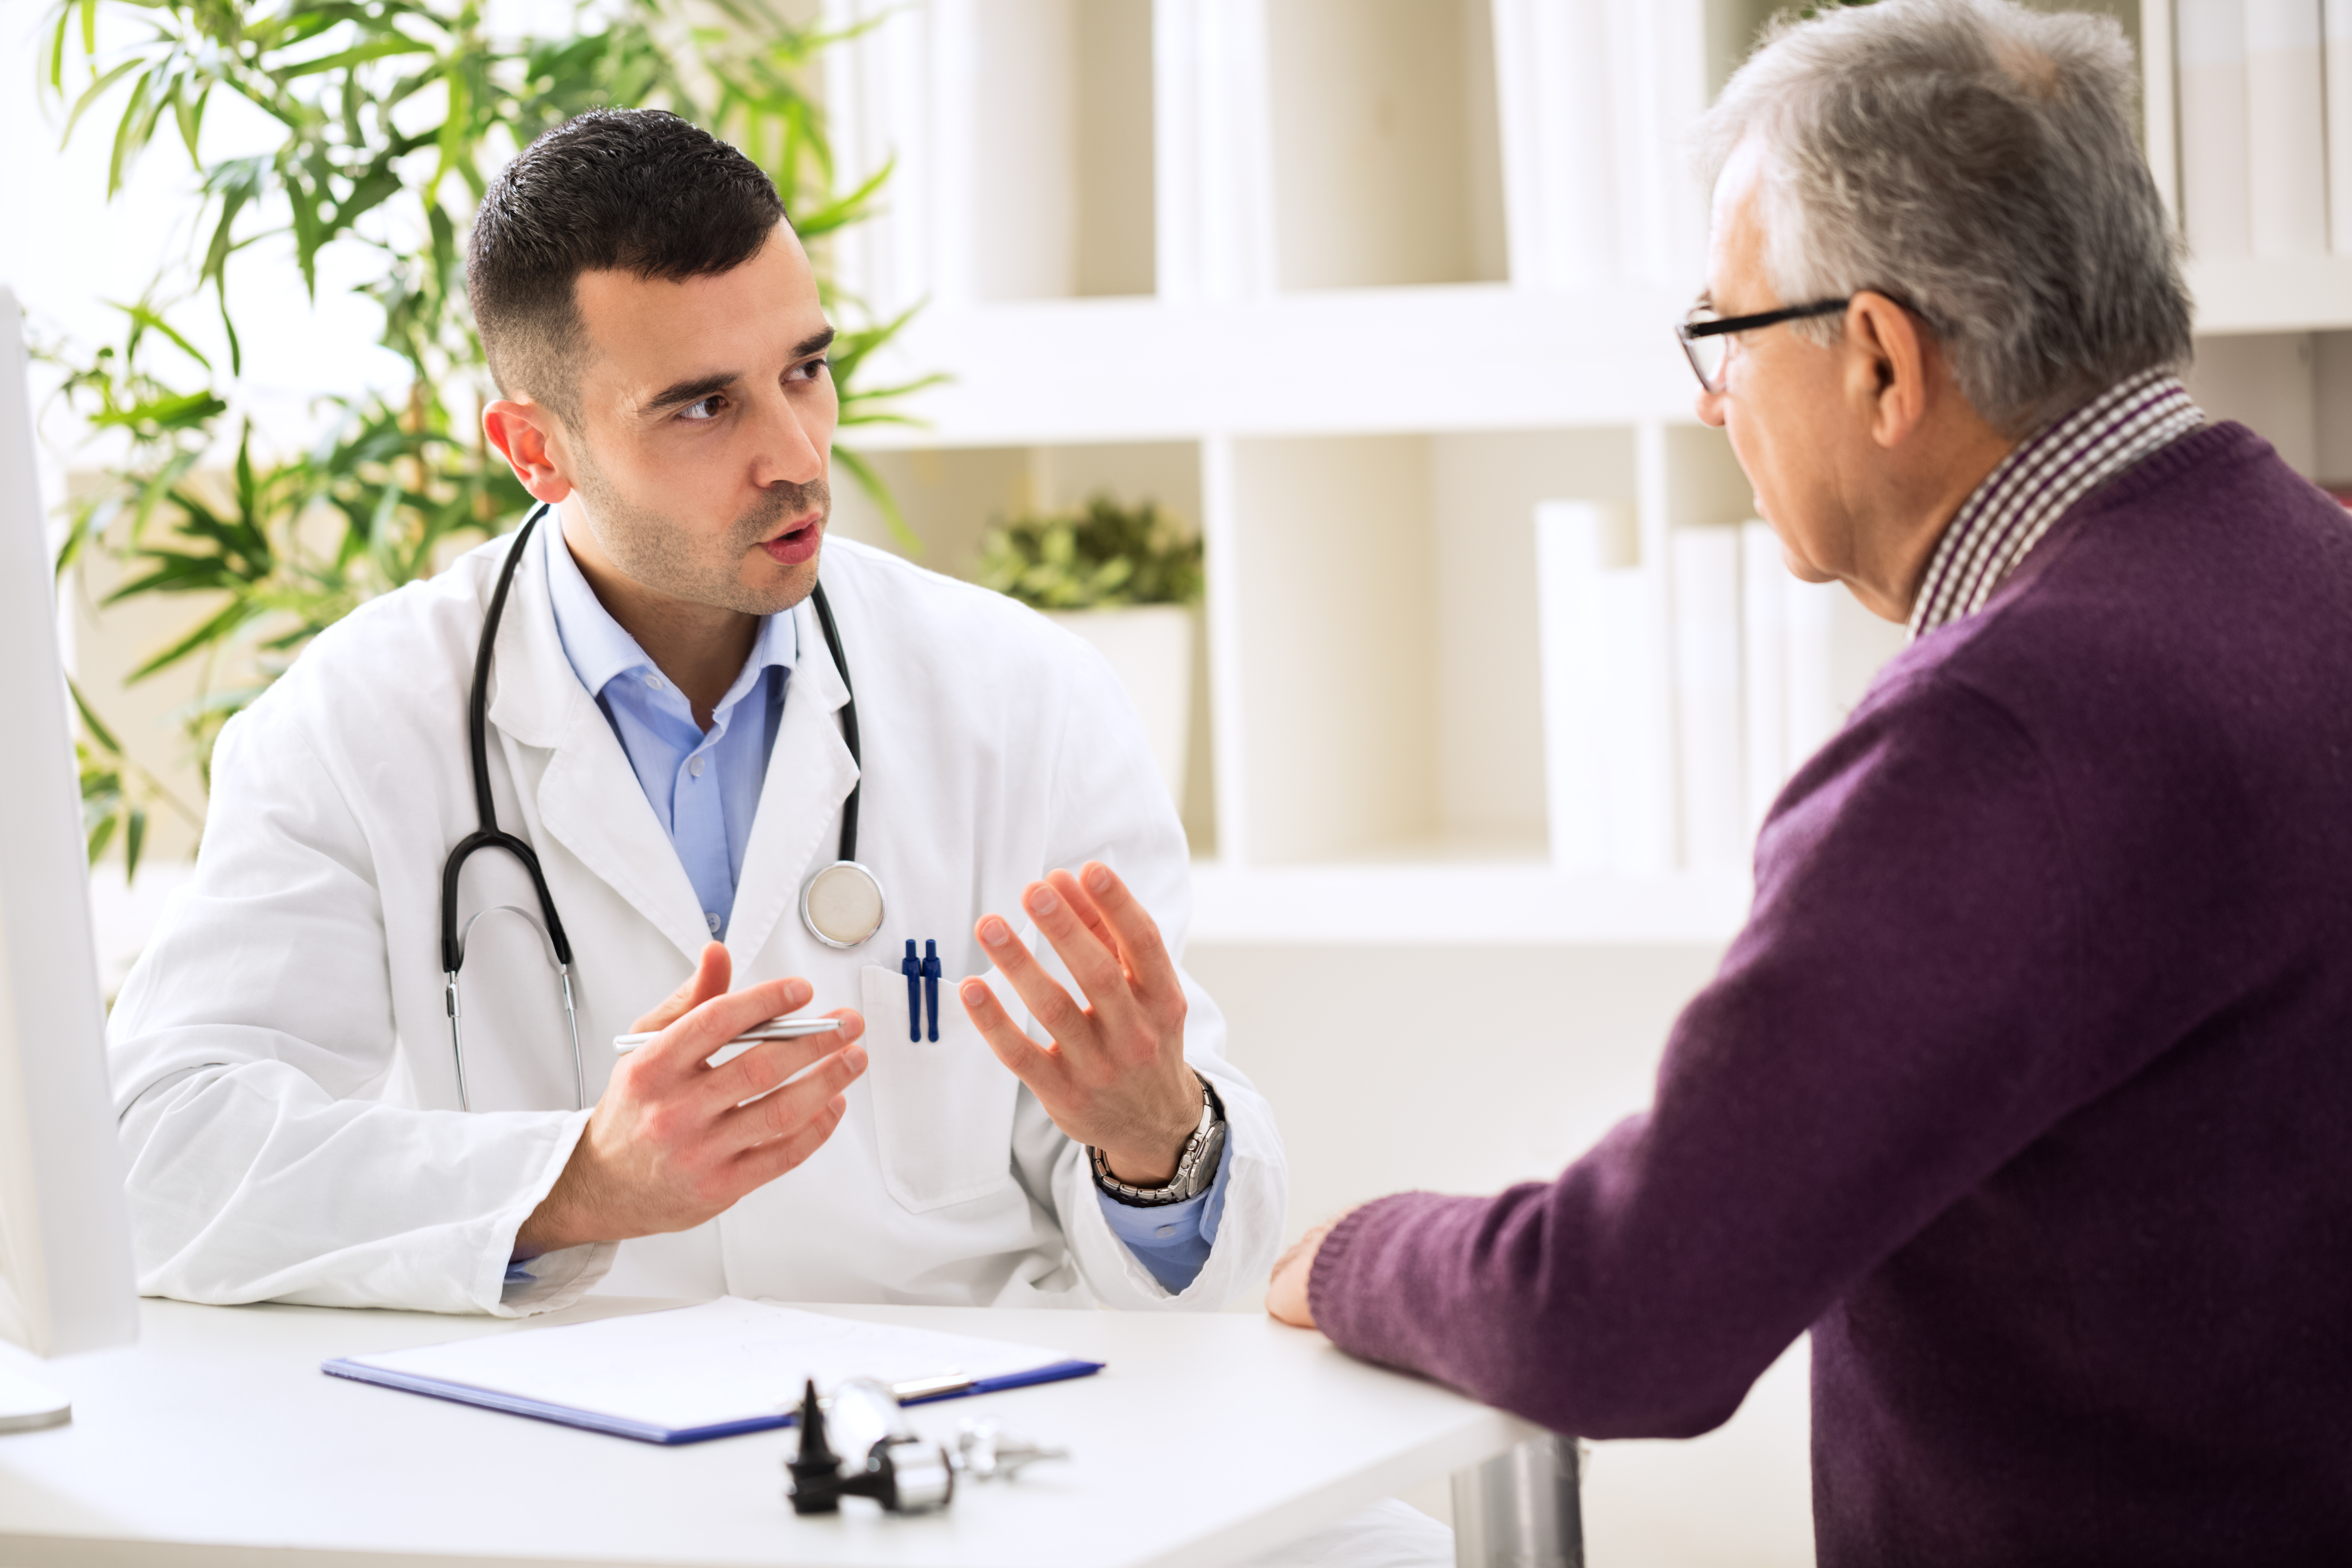 Image of a male doctor sitting across a table talking with an older man.